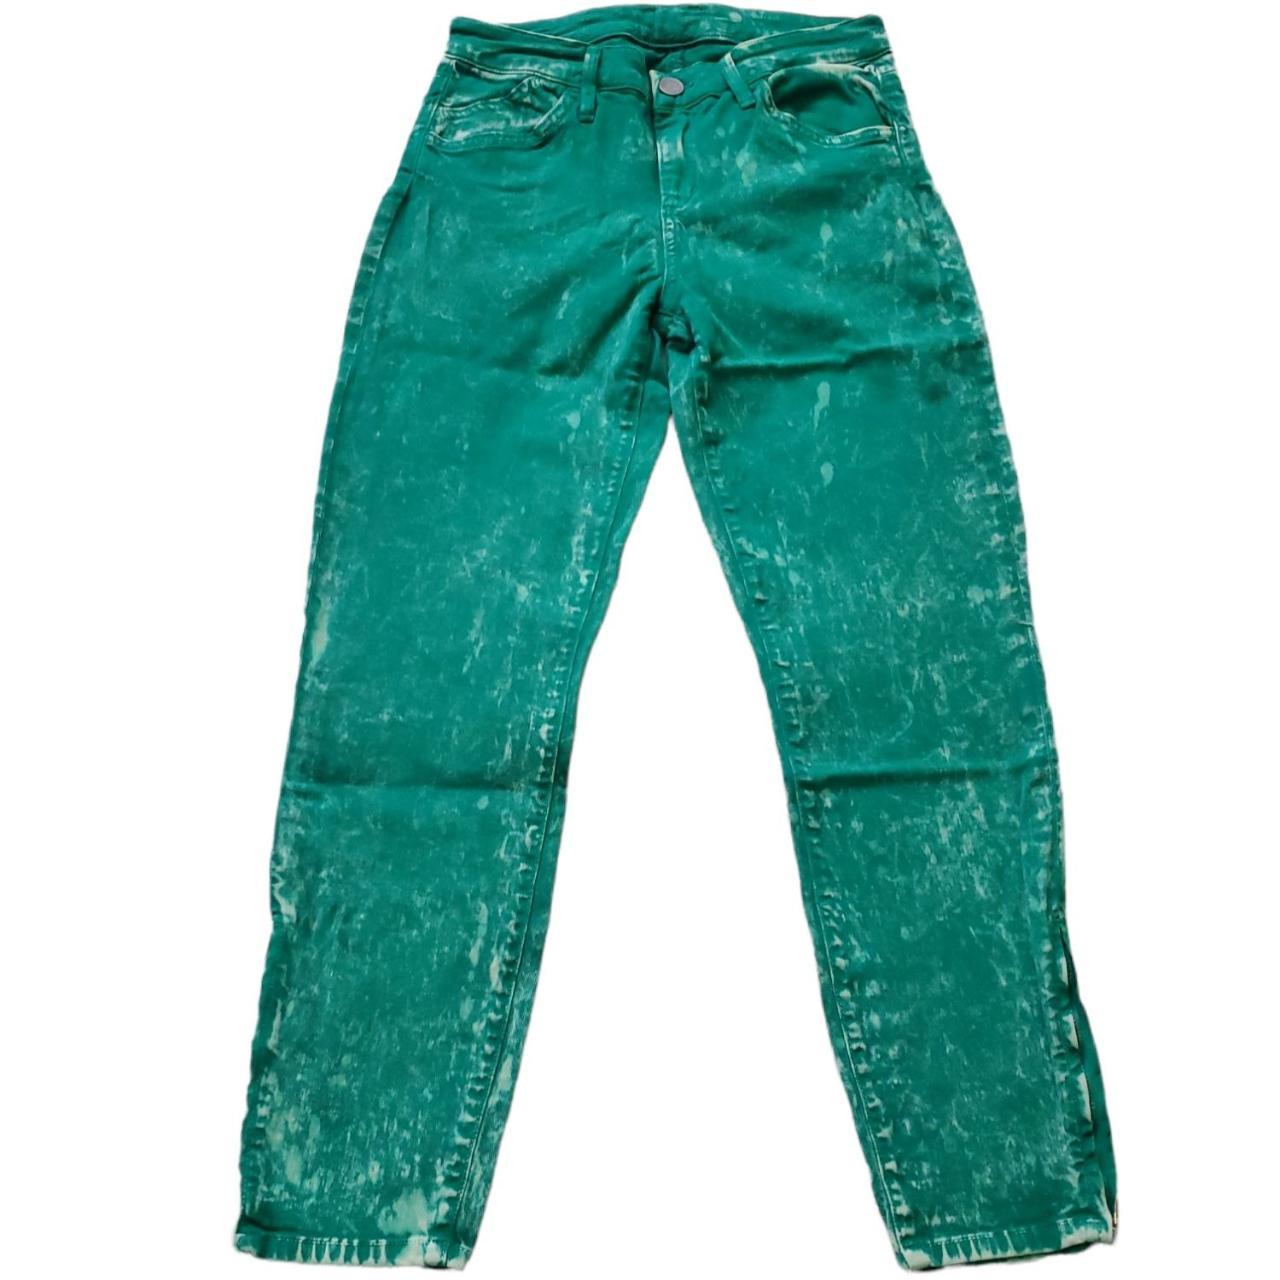 Product Image 1 - Goldsign glam jeans
Size 27
Green color
Bleached
Stretchy
5